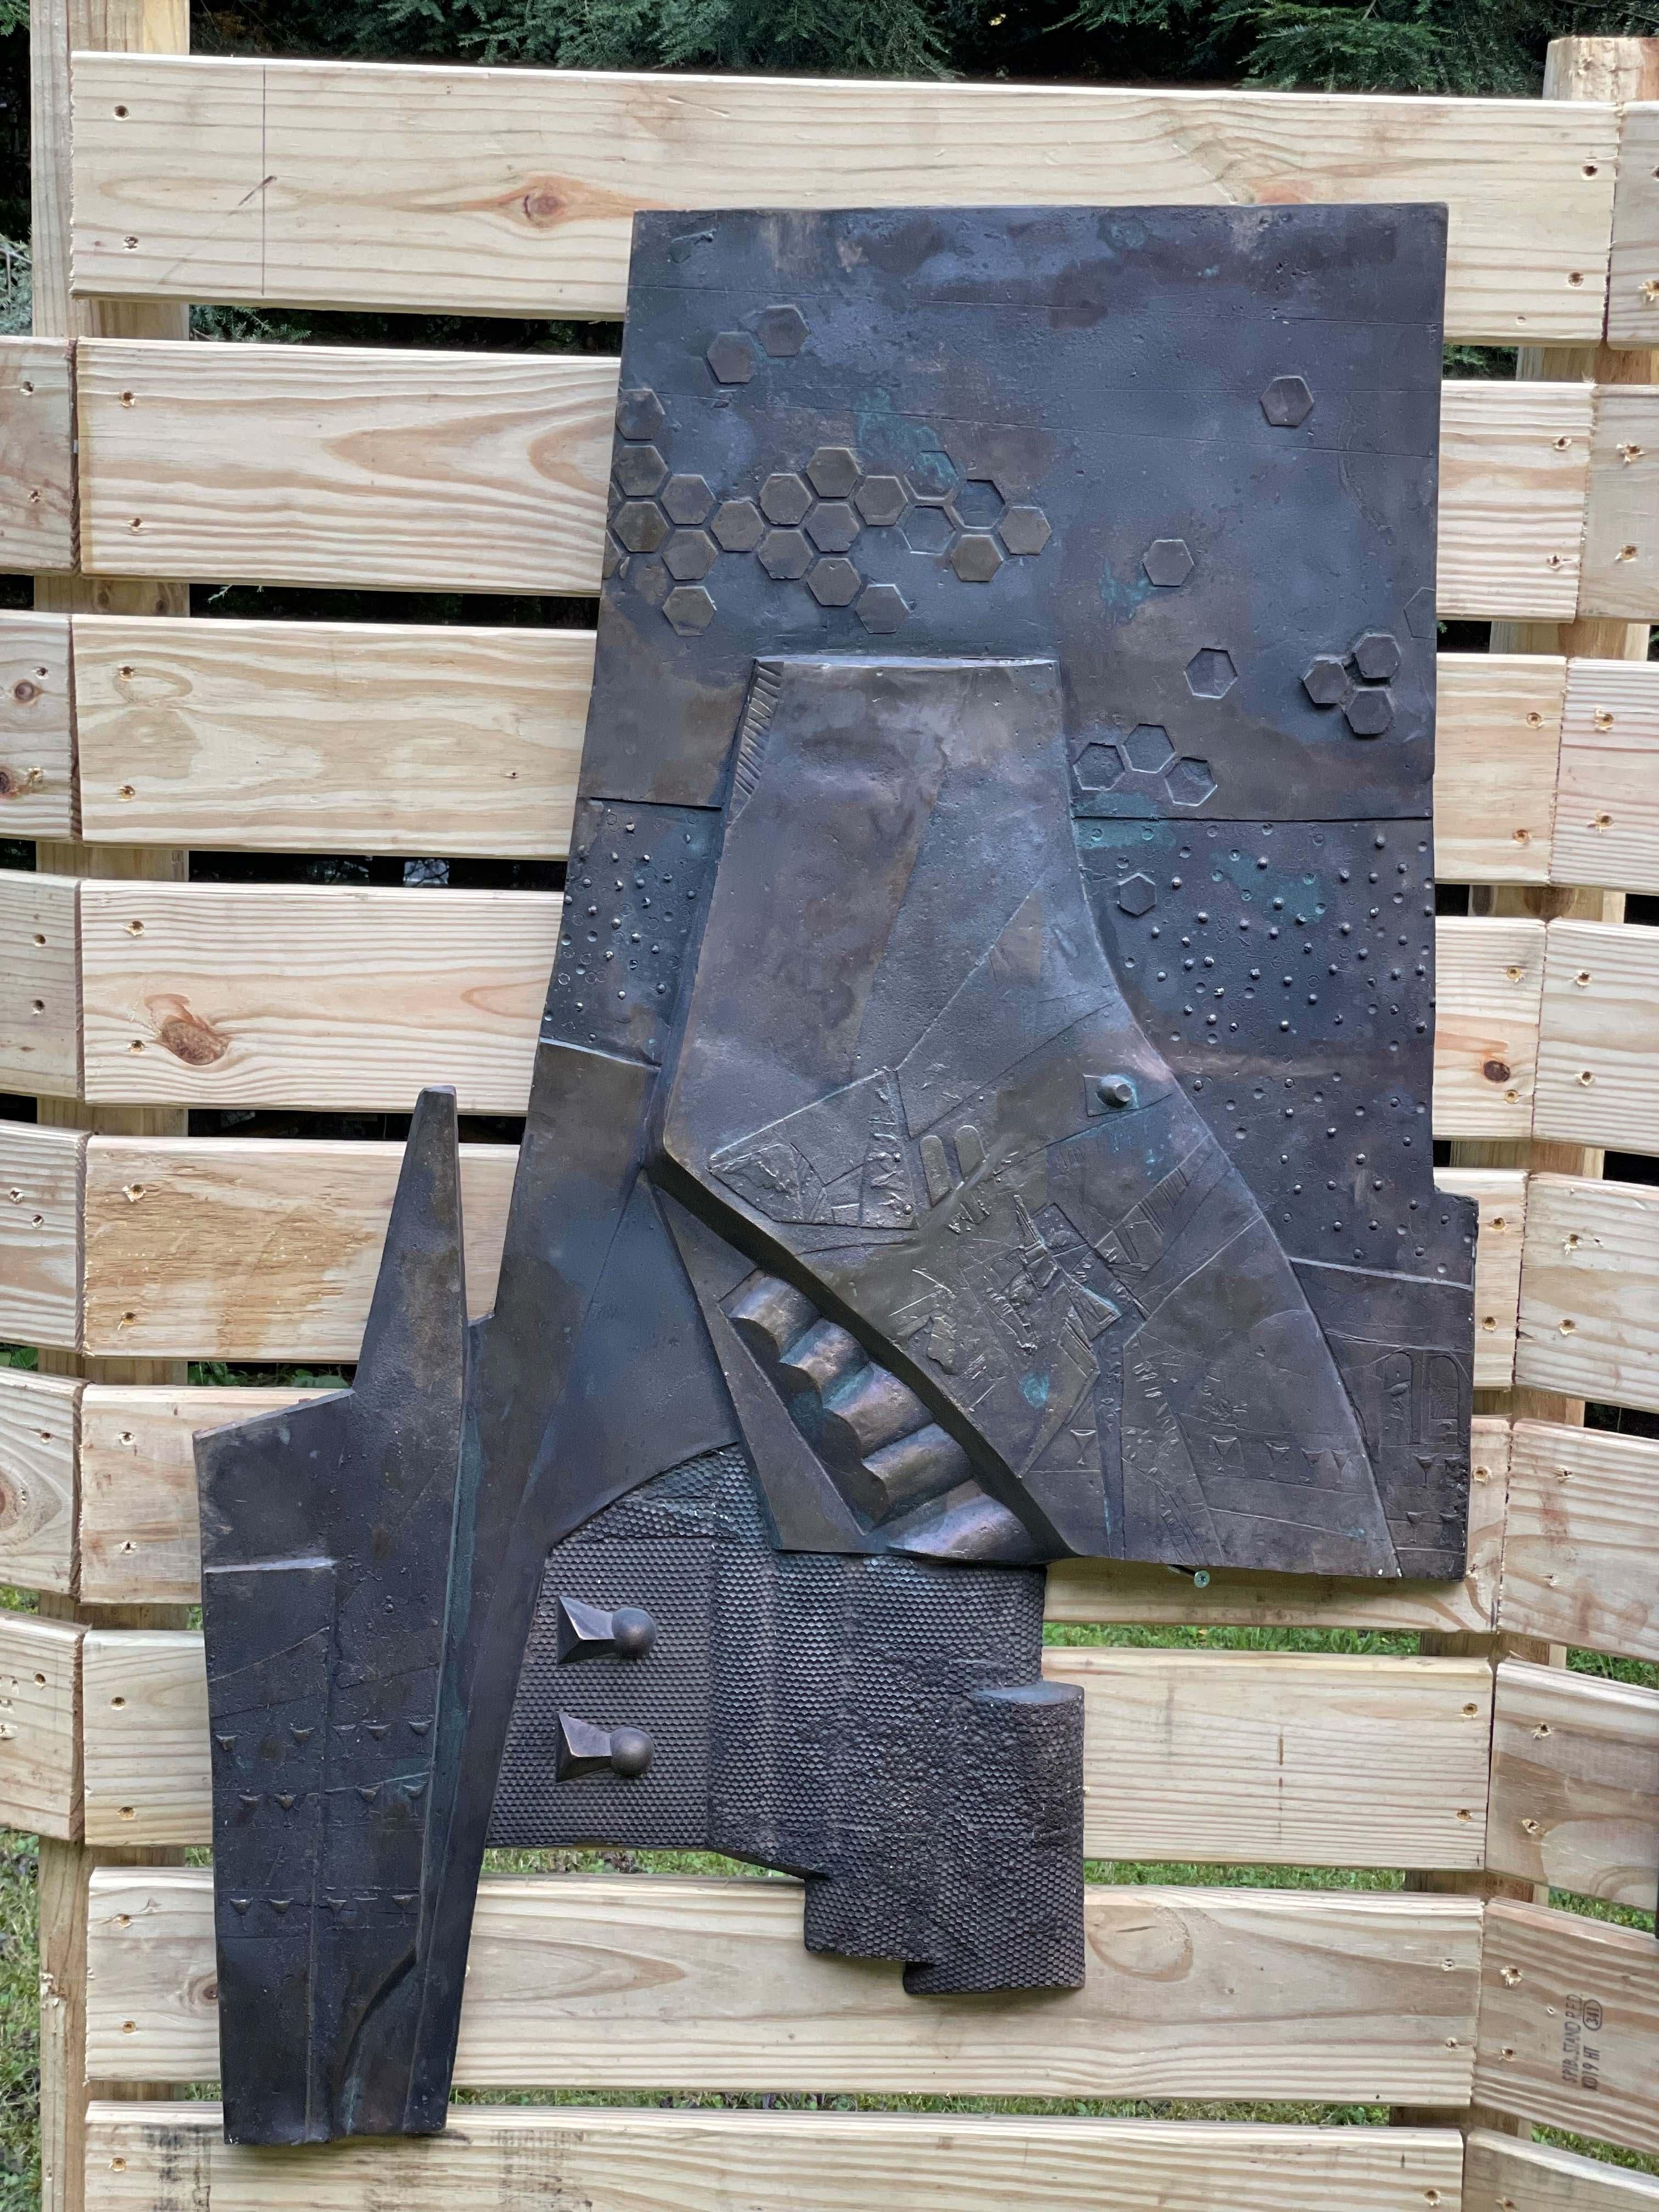 This is a bronze bas-relief triptych sculpture that was cast in Kyiv by Mykola Zhuravel in 2003. This sculpture is unique and consists of three parts - three unique Beehive Frames. It was exhibited as part of Apiary project in several US galleries